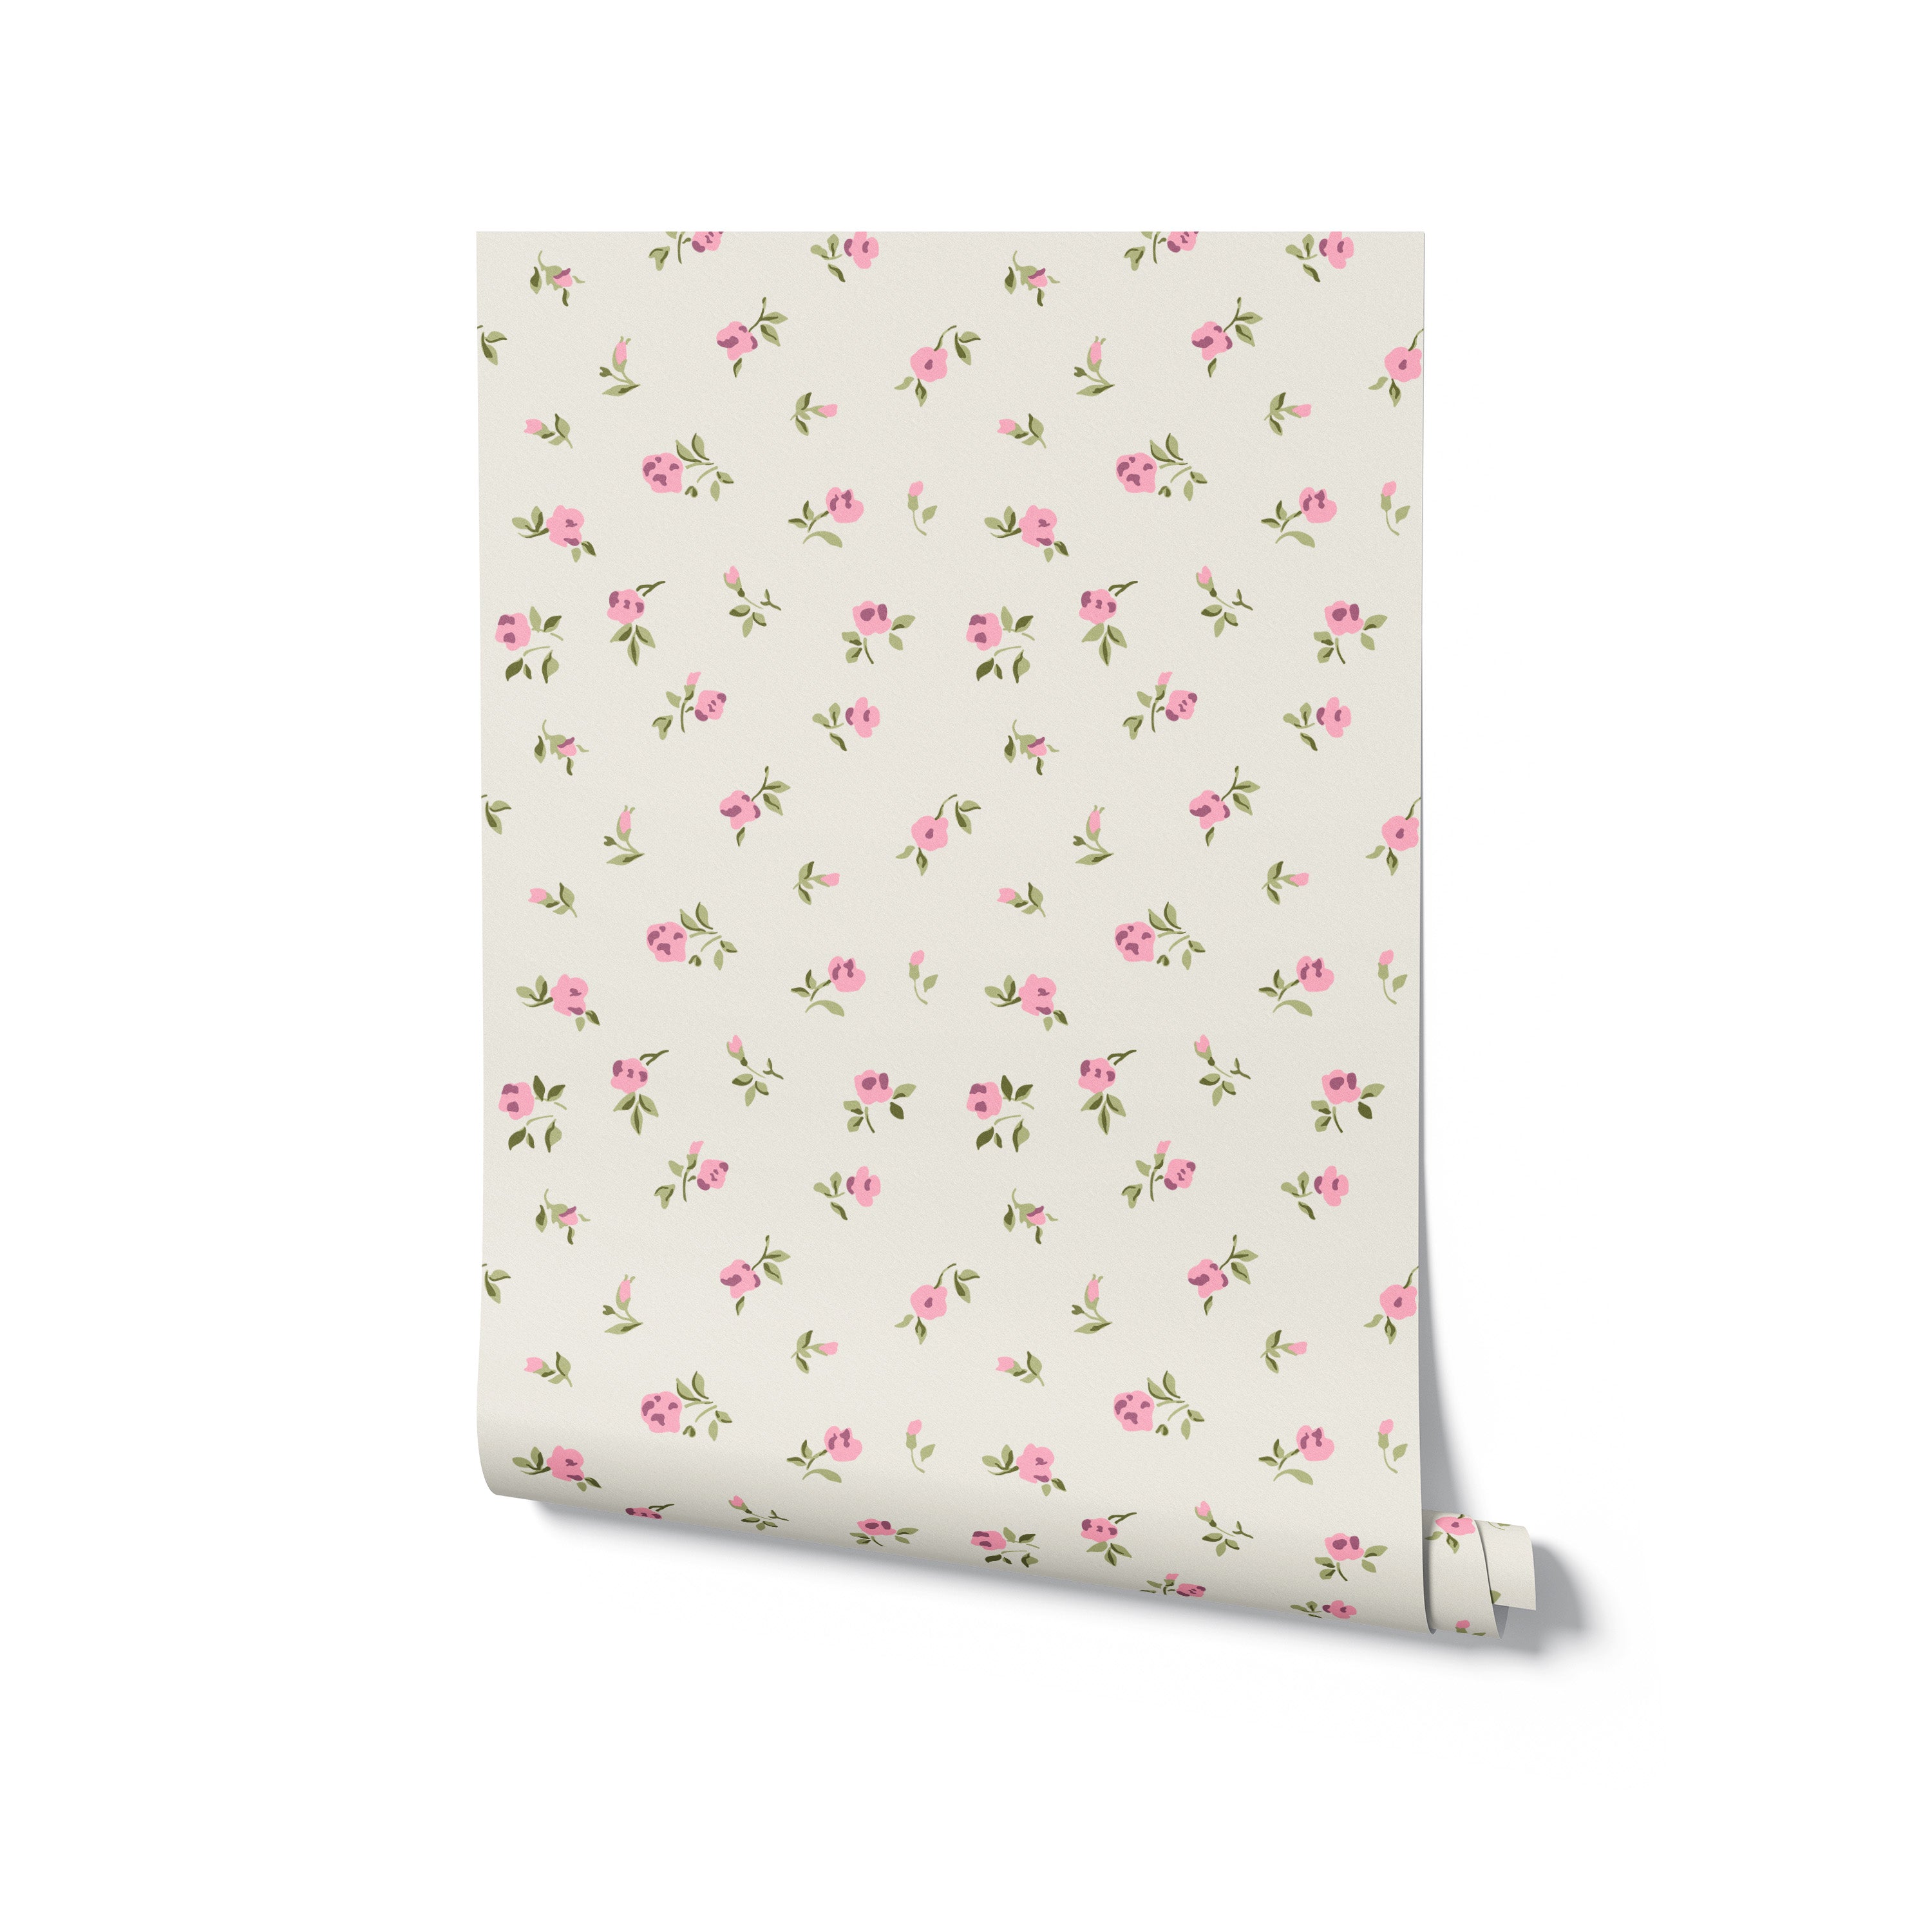 A roll of Flora Wallpaper illustrating a gentle and cheerful pattern of pink blossoms and green leaves on a cream base. This wallpaper is perfect for adding a bright and airy feel to interior spaces, making rooms appear more spacious and welcoming.